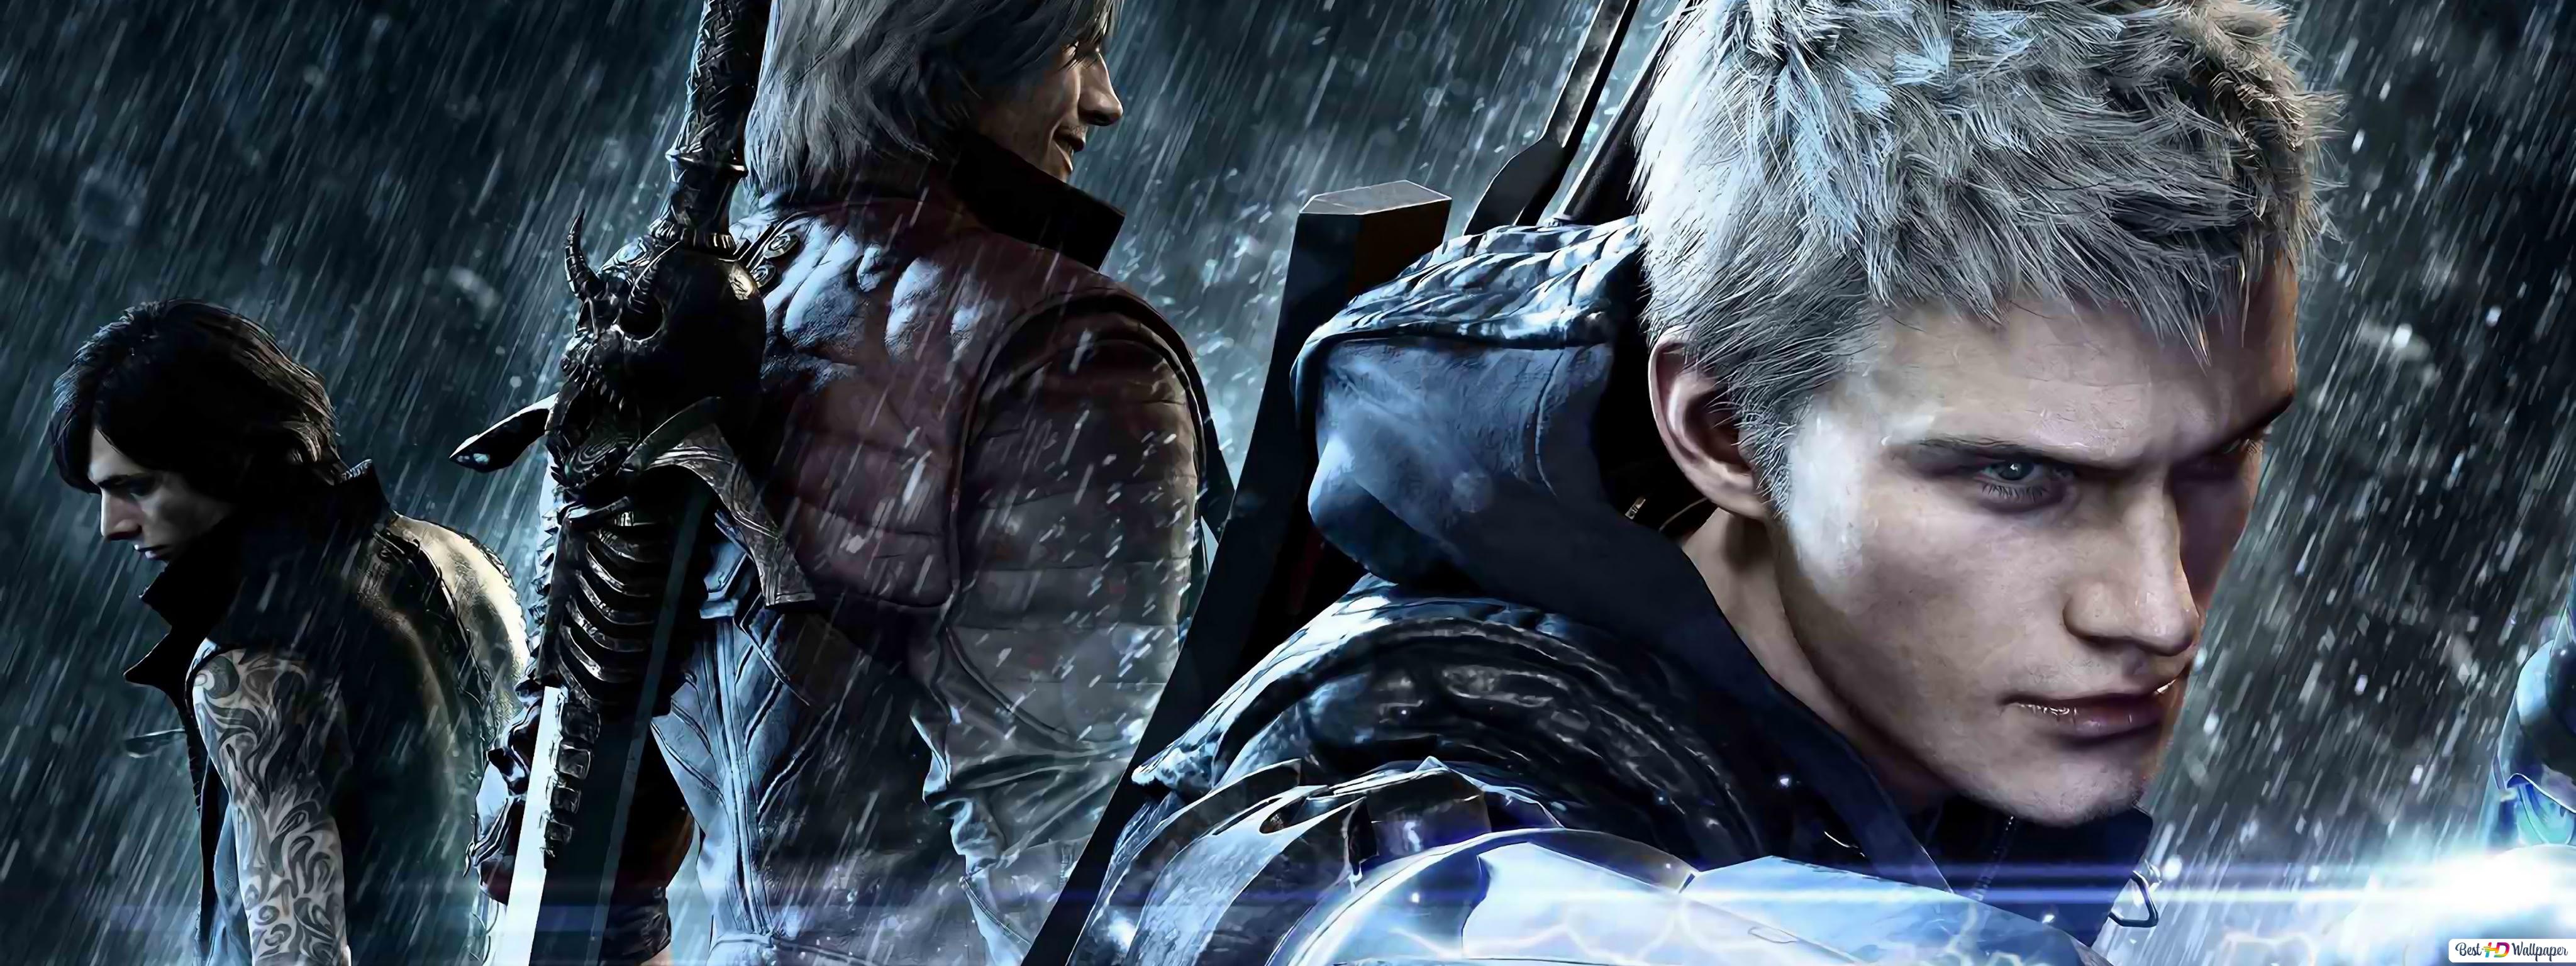 Nero with V & Dante May Cry 5 (Video Game) HD wallpaper download